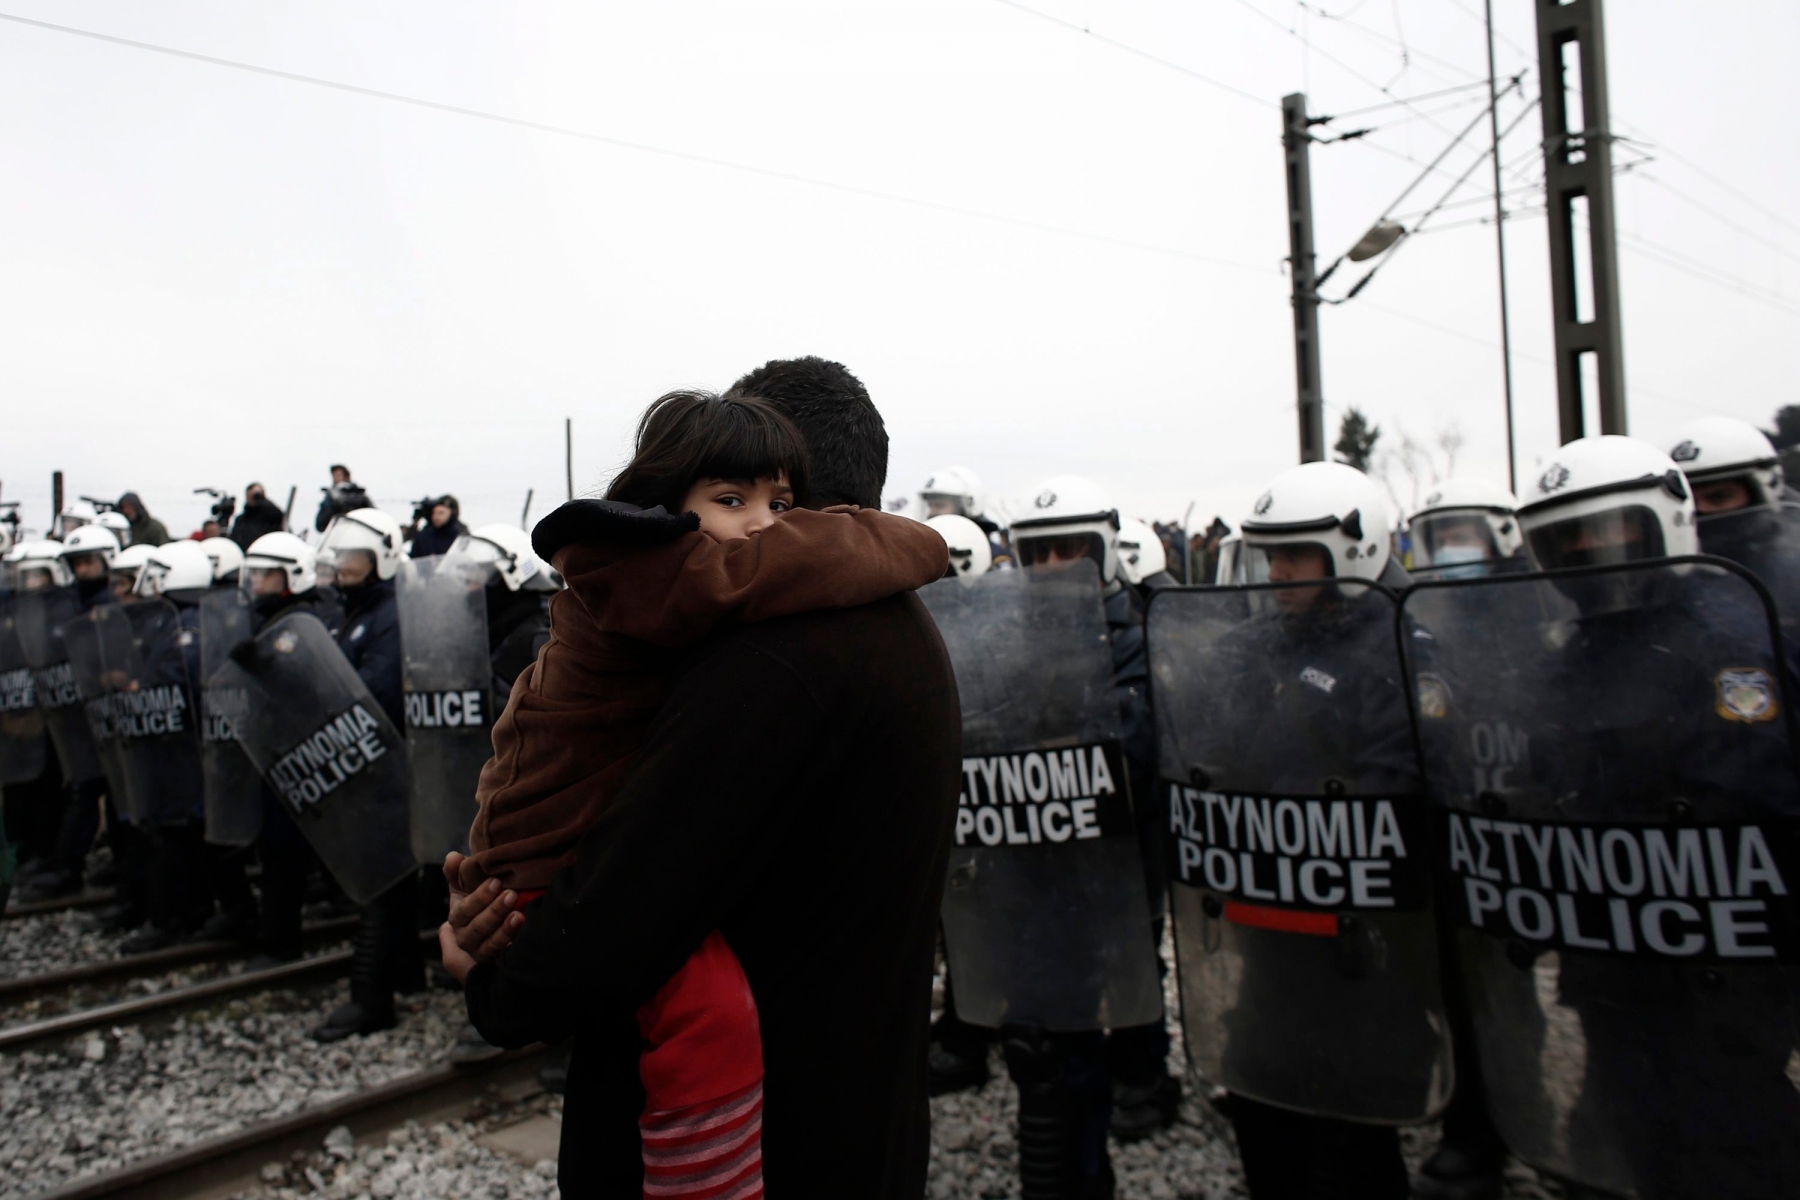 epa05232701 A Syrian refugee child looks as her father carry her in front of riot police during a protest organised by refugees and migrants demanding the opening of the borders at the refugee camp of Idomeni near the Greek-Former Yugoslav Republic of Macedonia (FYROM) borders in northern Greece, 27 March 2016. Migration restrictions along the so-called Balkan route, the main path for migrants and refugees from the Middle East into the European Union, has left thousands of migrants trapped in Greece.  EPA/KOSTAS TSIRONIS GREECE REFUGEES MIGRATION CRISIS